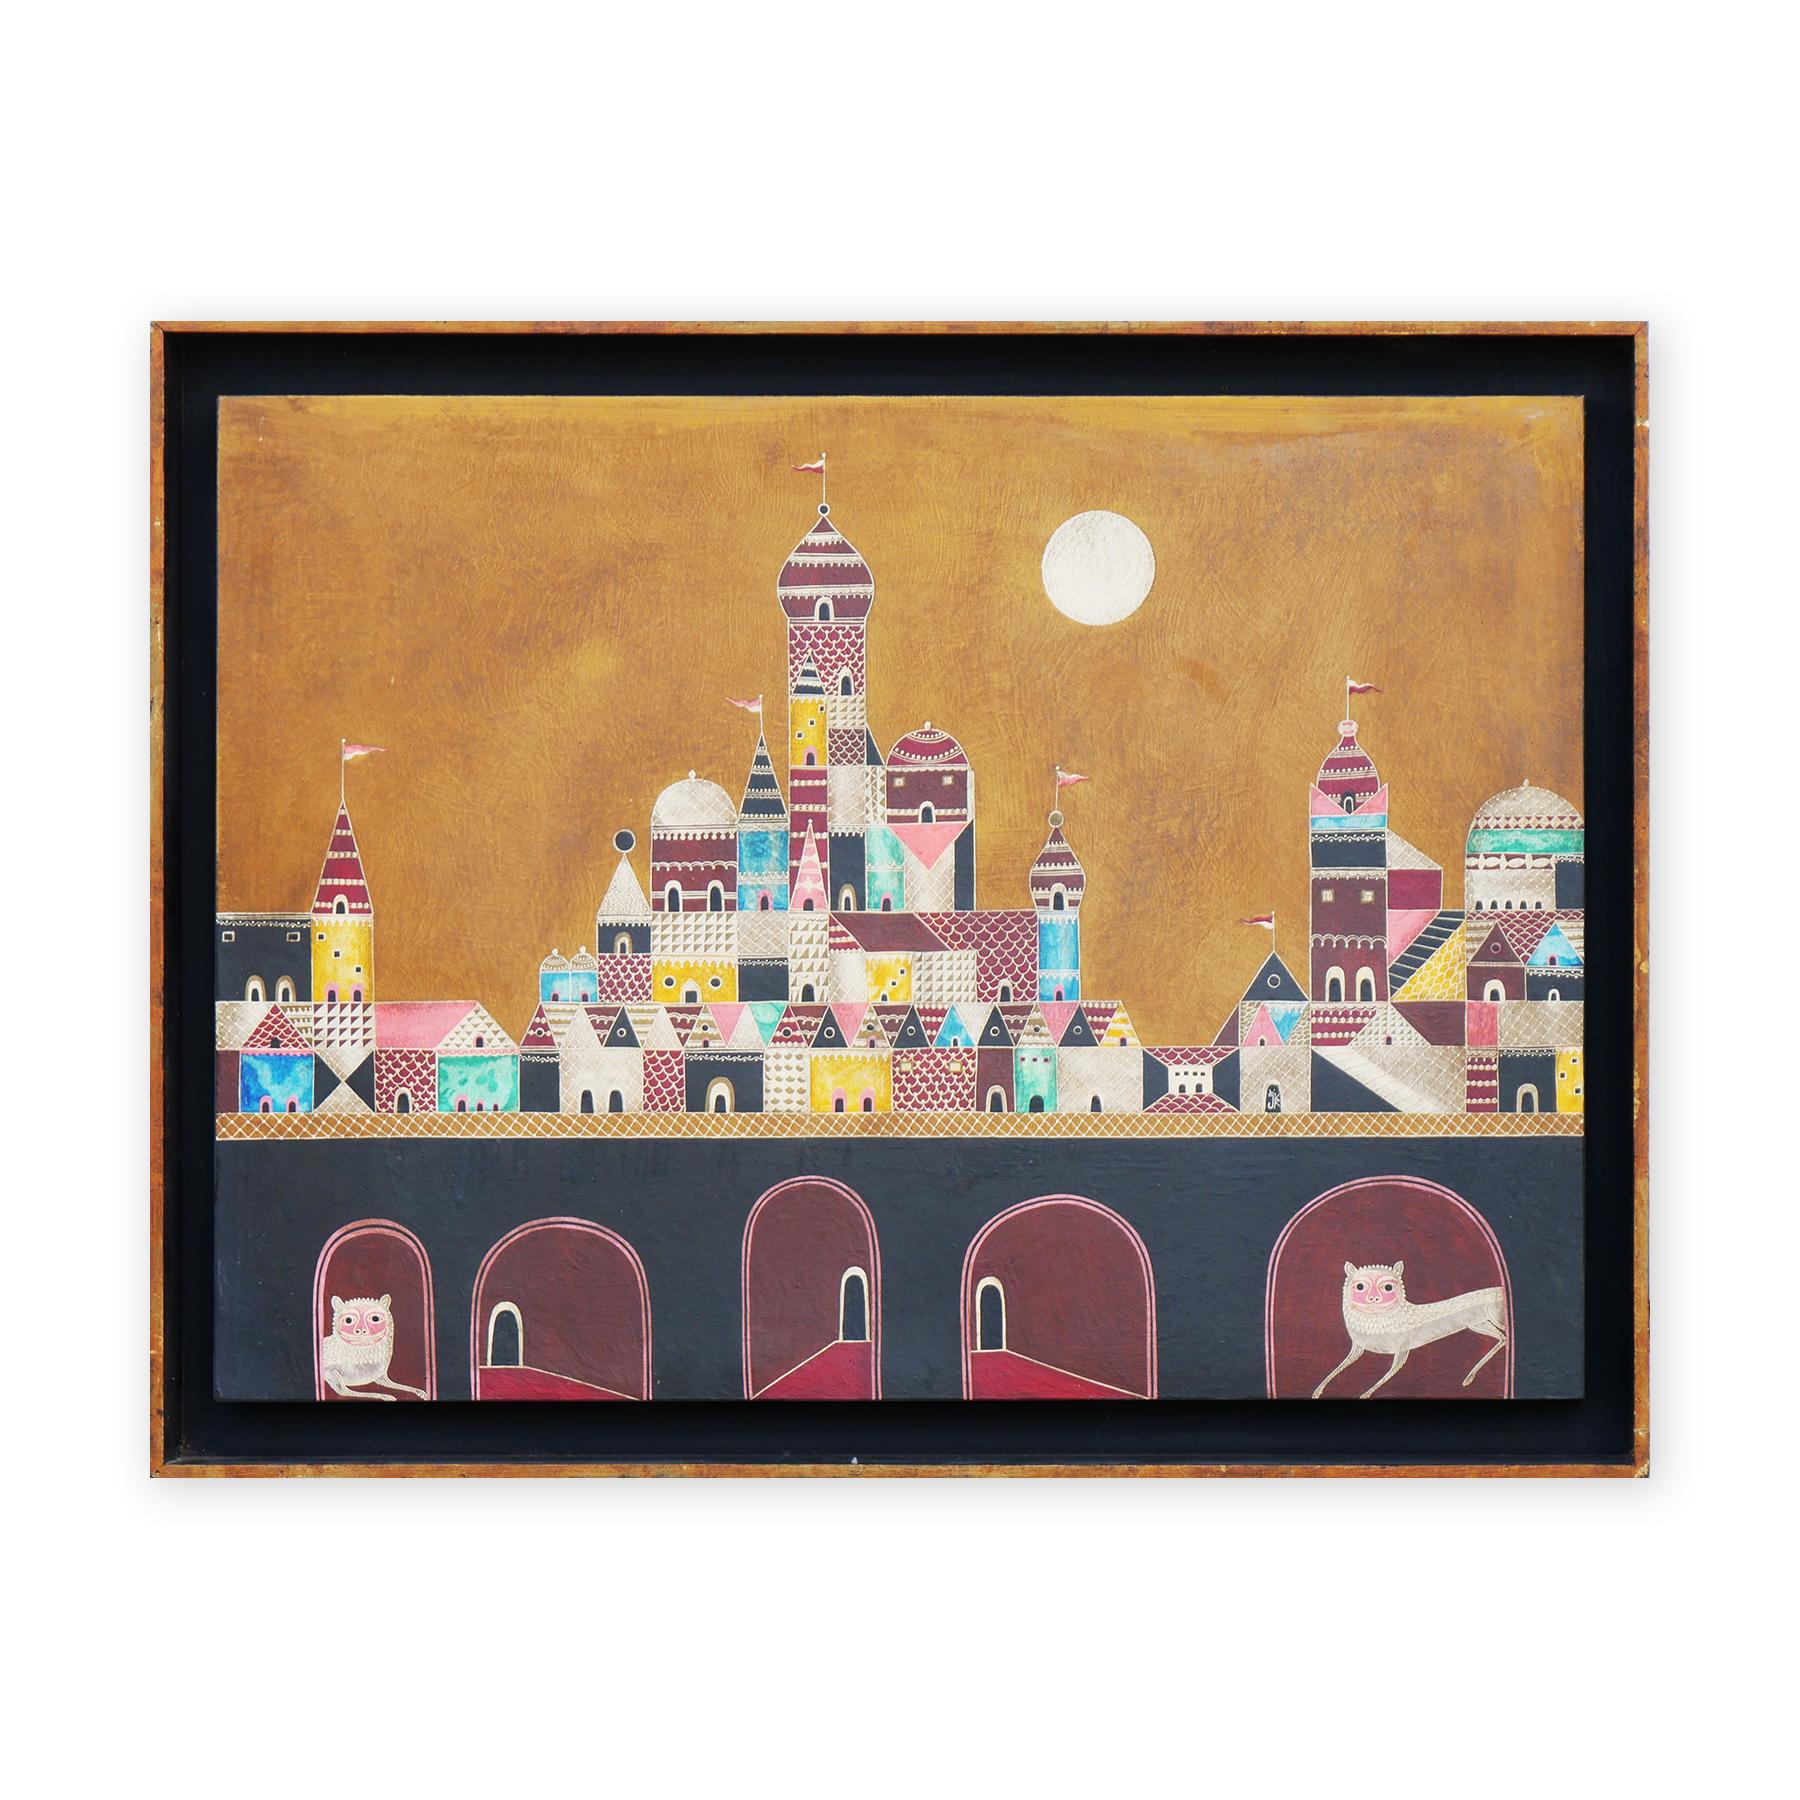 Eastern European inspired abstract landscape painting by an unknown artist. The work features intricately patterned buildings with 